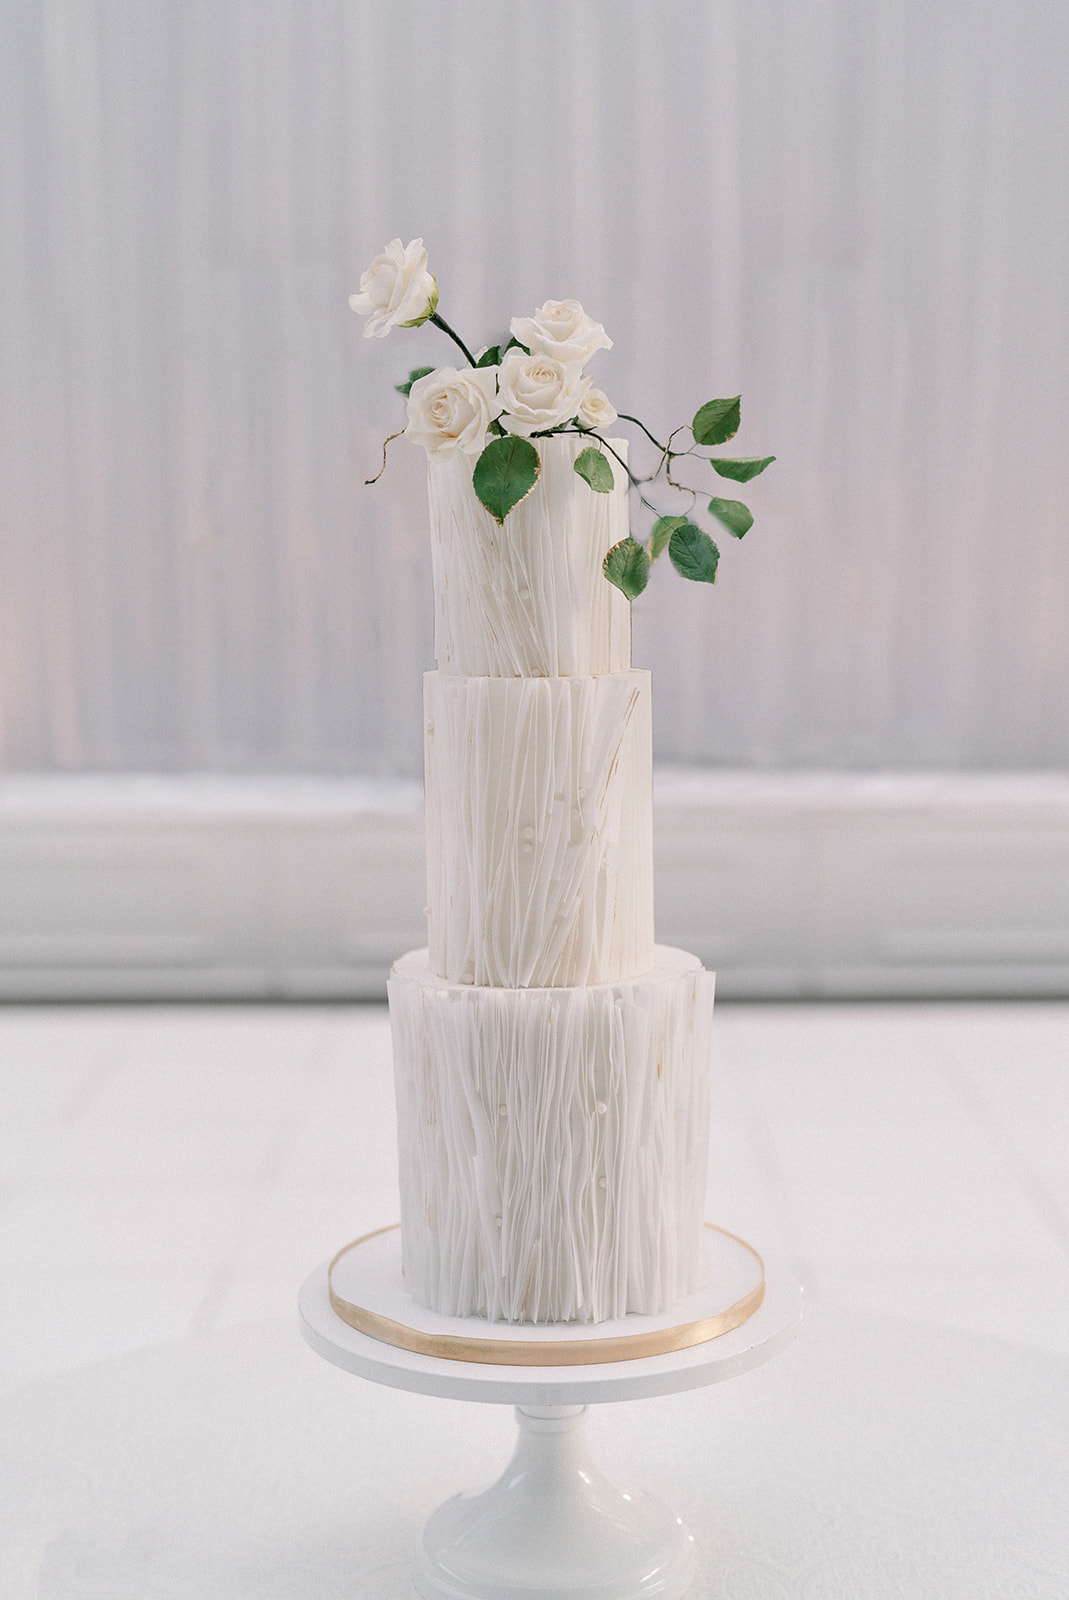 Cleveland Museum of Art, elegant and simple wedding cake at a Gold and White Wedding Reception at the Cleveland Museum of Art by HeatherLily